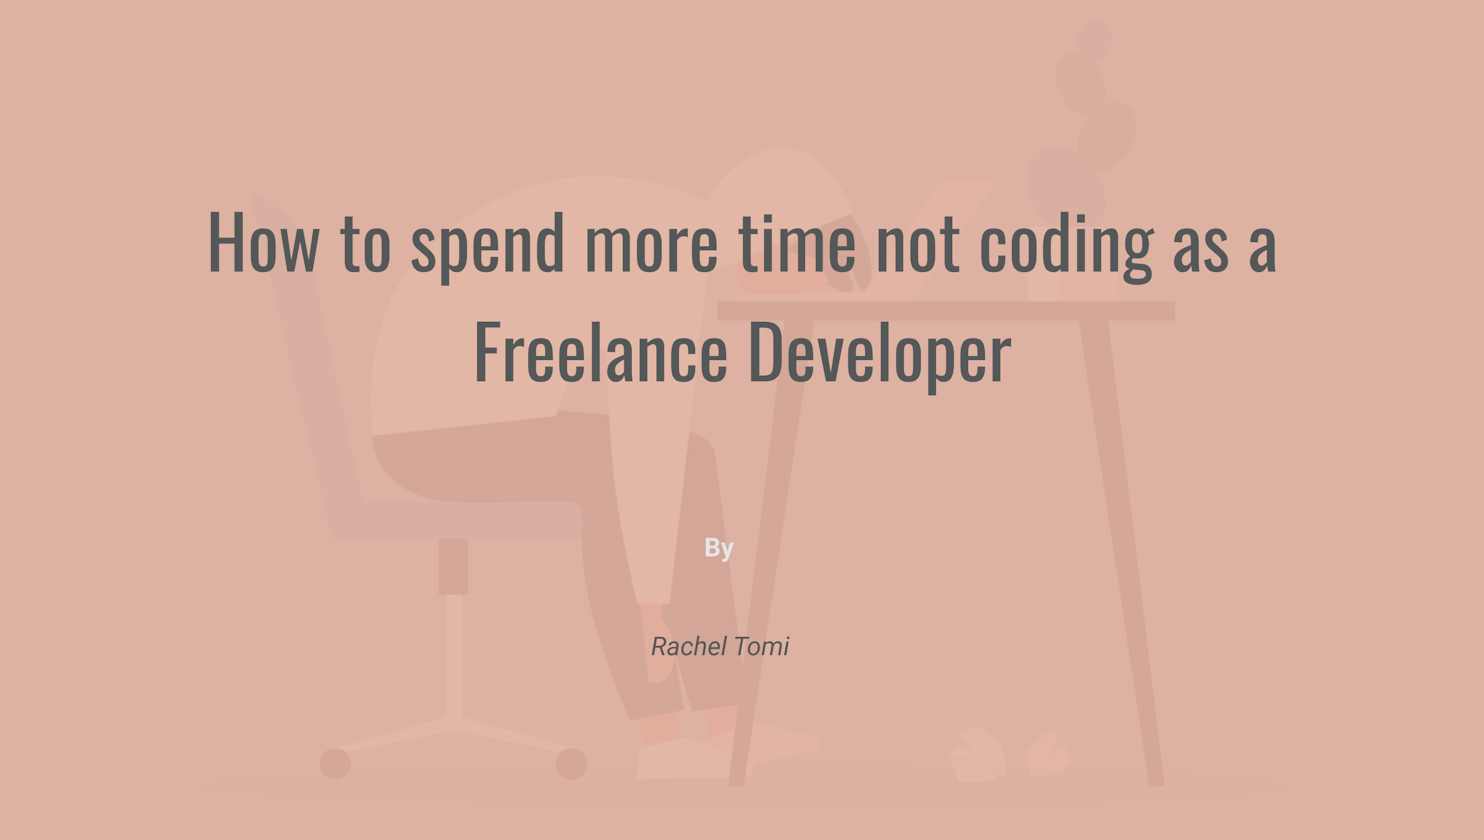 How to spend more time not coding as a Freelance Developer